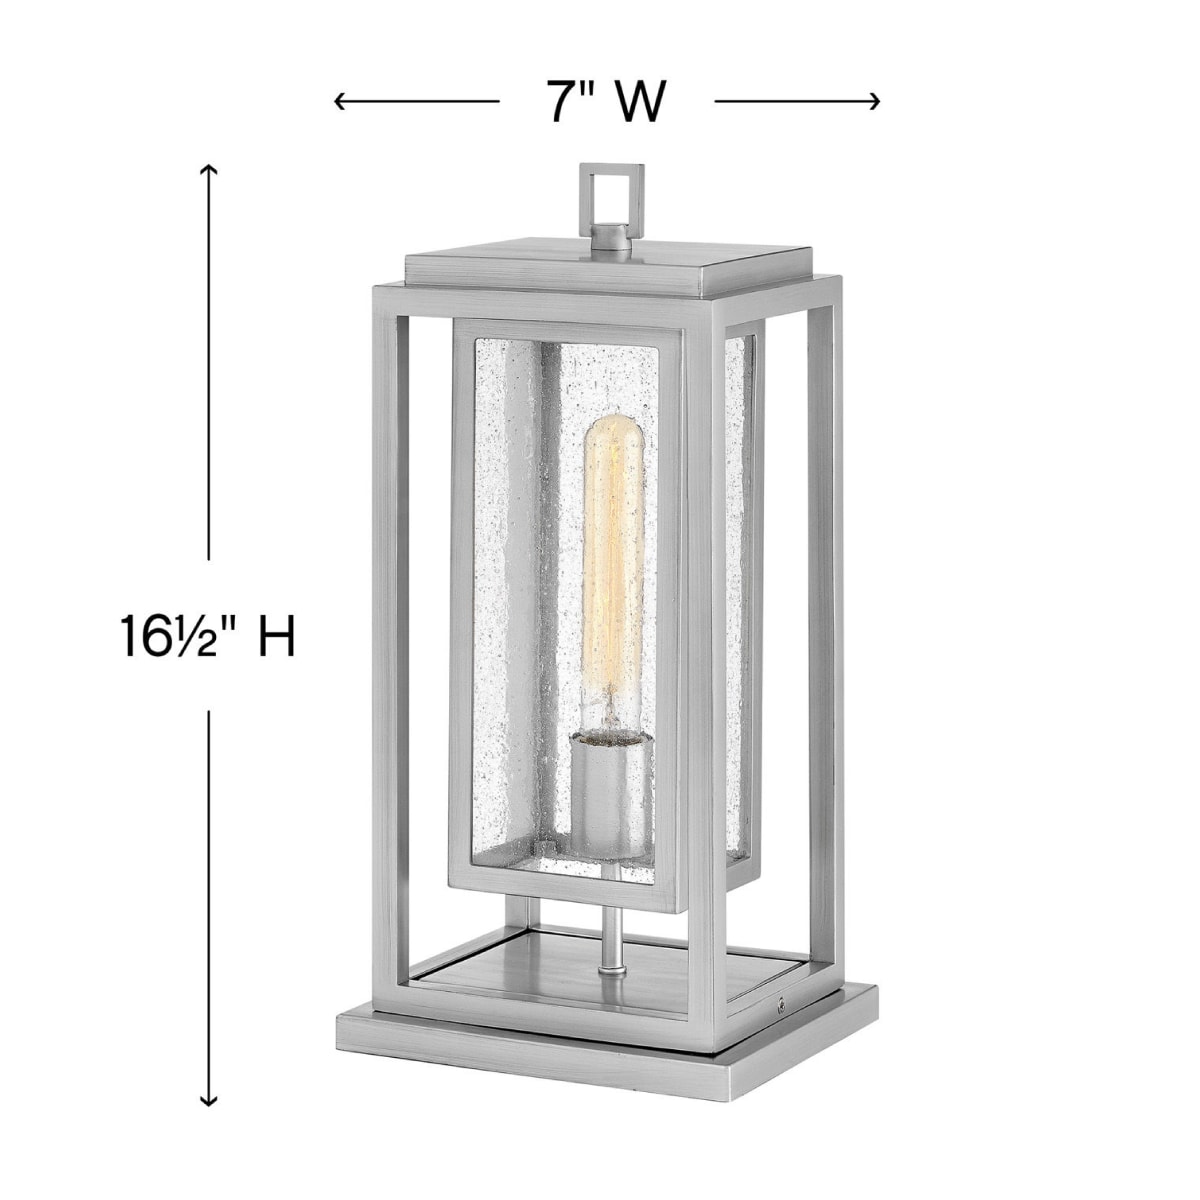 Hinkley Lighting 1671BK-LV Edgewater 3 Light 21 Inch Tall LED Outdoor Post  Light in Black with Clear Seedy Glass